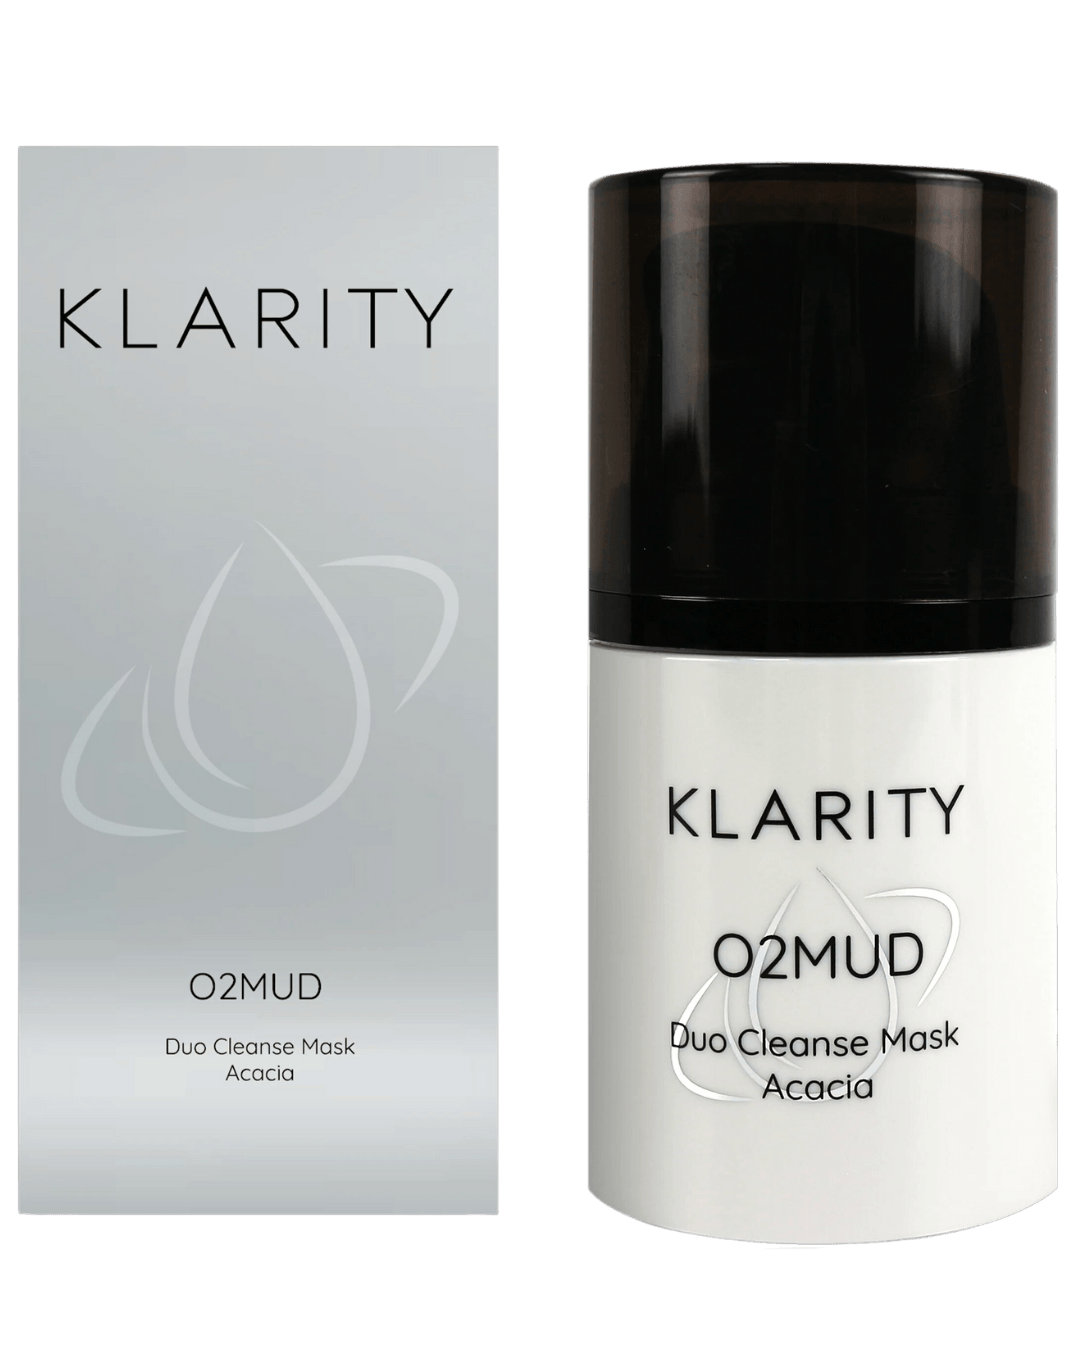 Daily Vanity Beauty Awards 2024 Best Skincare Klarity Skincare 02MUD Acacia Duo Cleanse Mask Voted By Beauty Experts